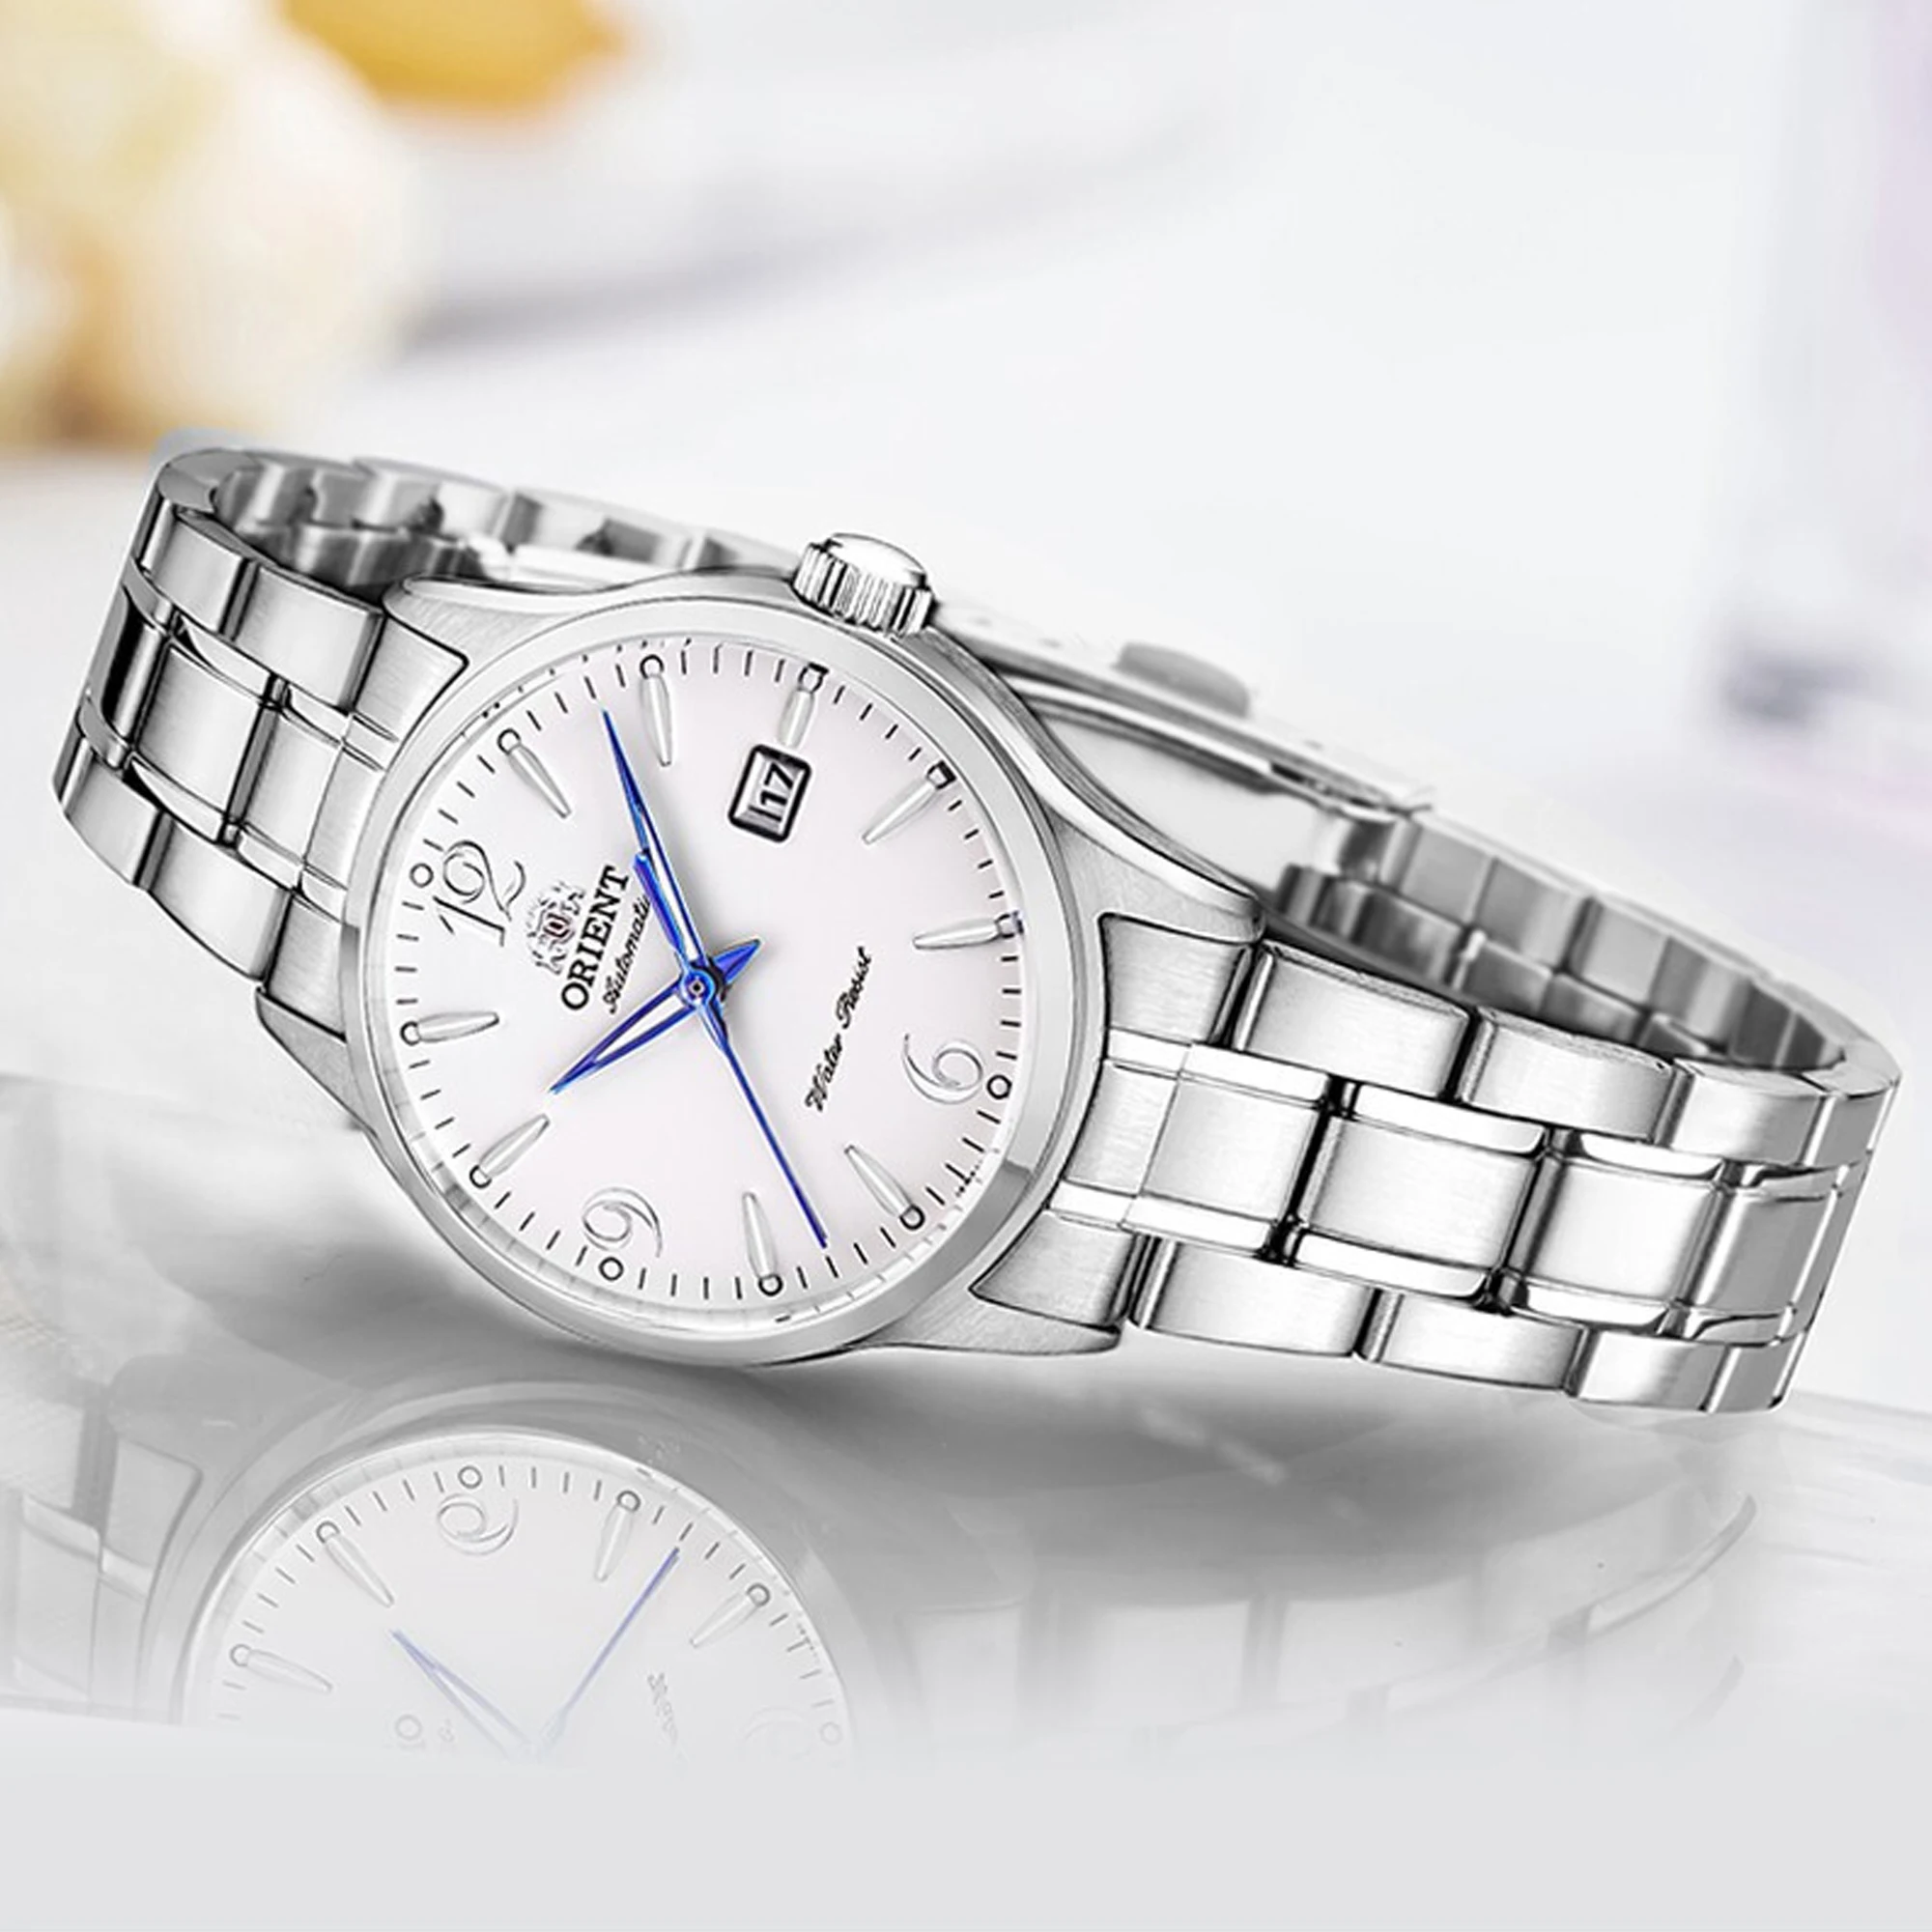 Original Orient Automatic Watch for Women, Japanese Wrist Watch Classic White Dial Blue Hands Dress Watch Stainless Steel 31mm enlarge